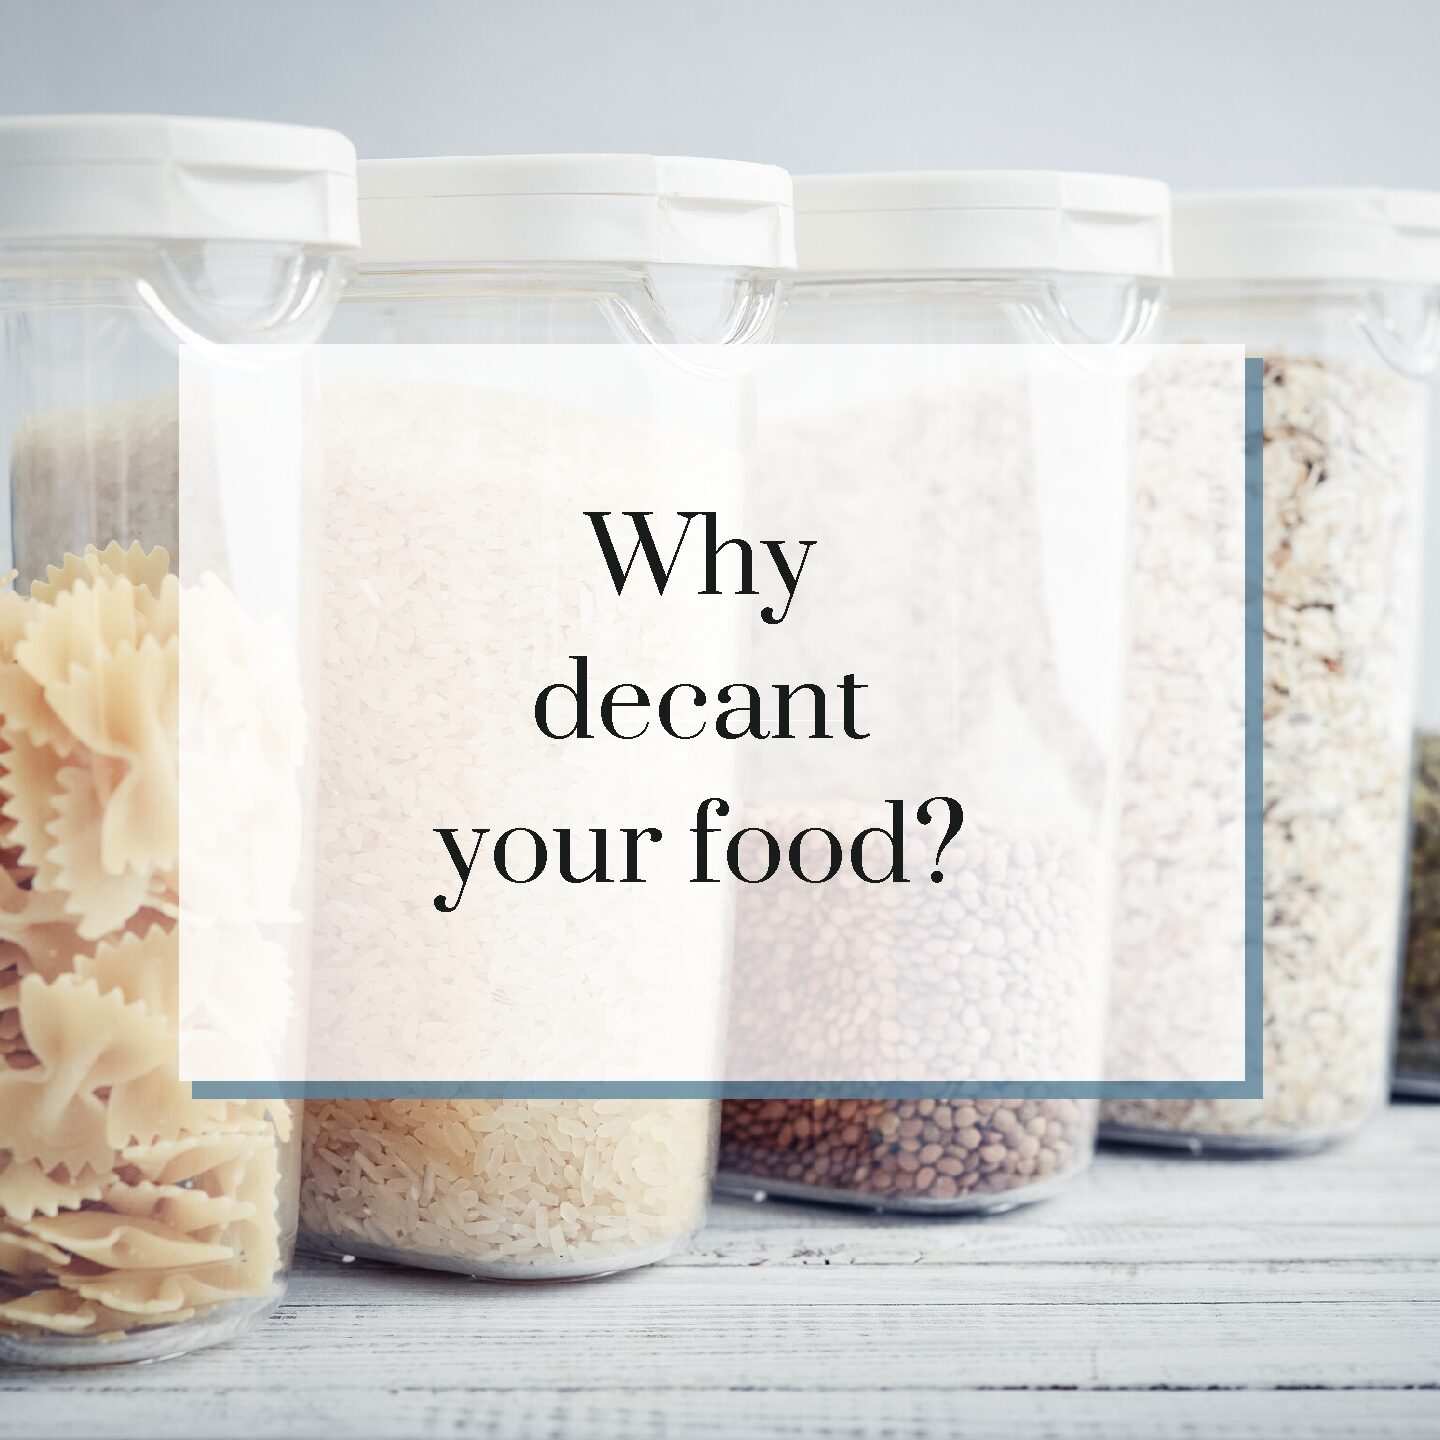 Why decant your food into storage containers?